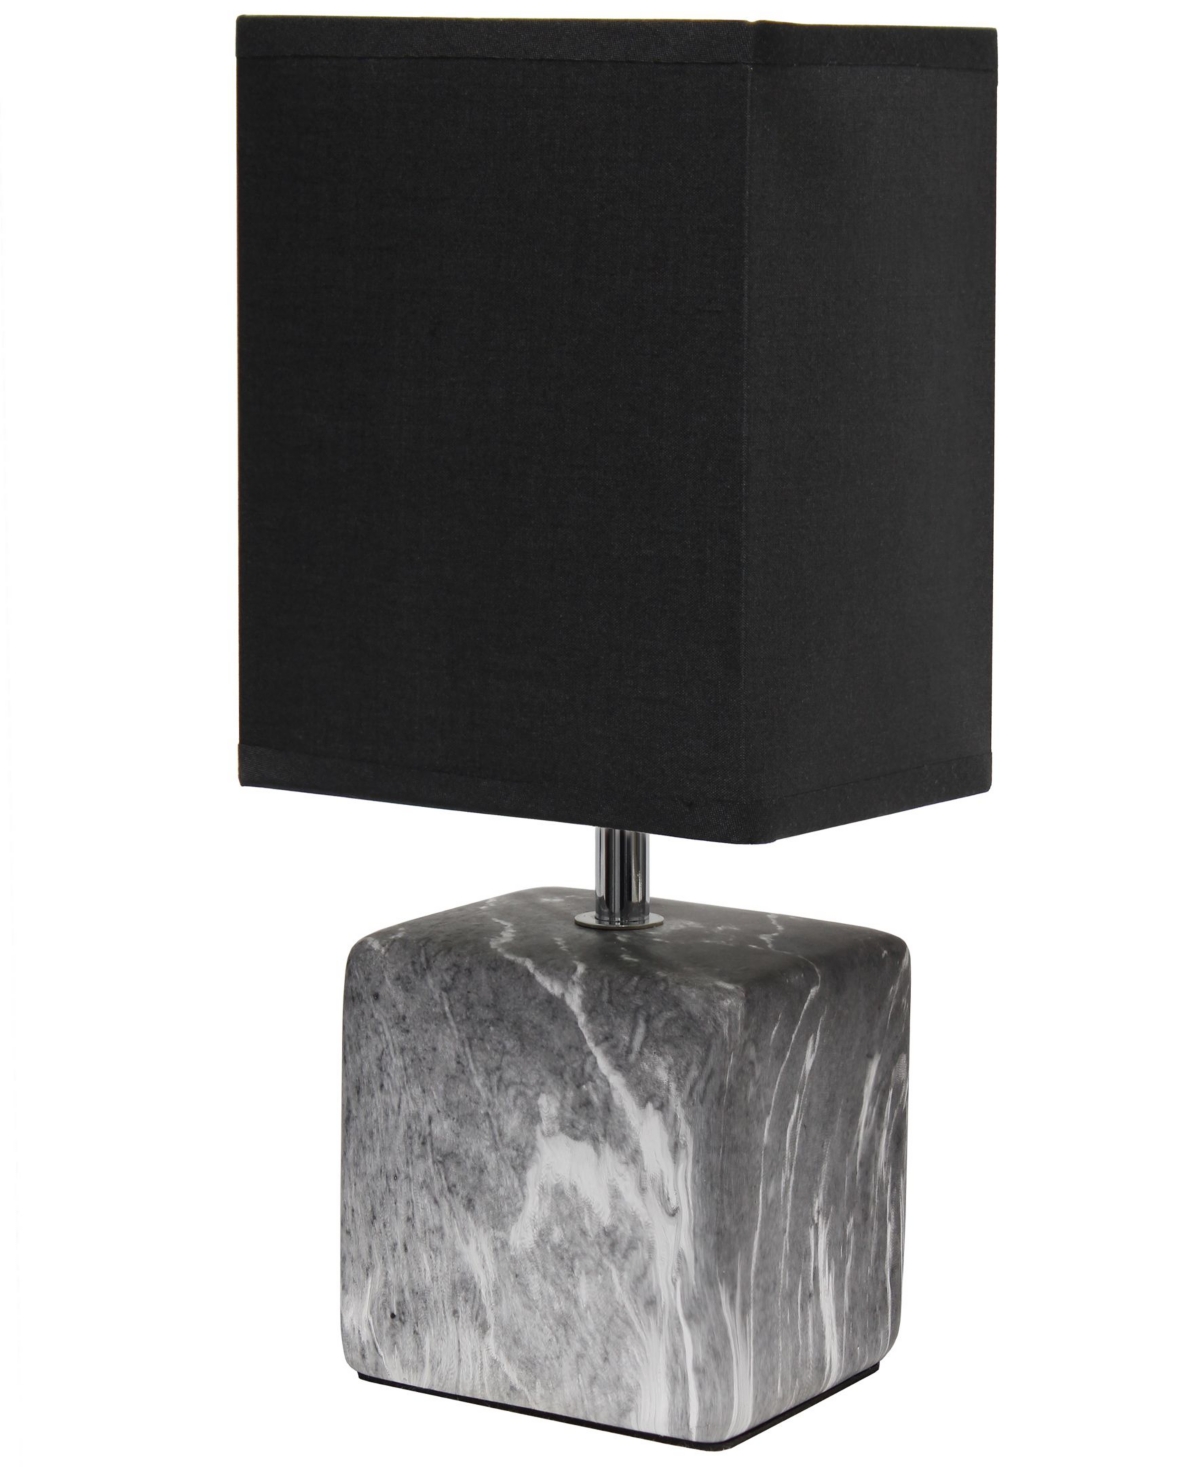 Simple Designs Petite Table Lamp With Shade In Black Base,black Shade